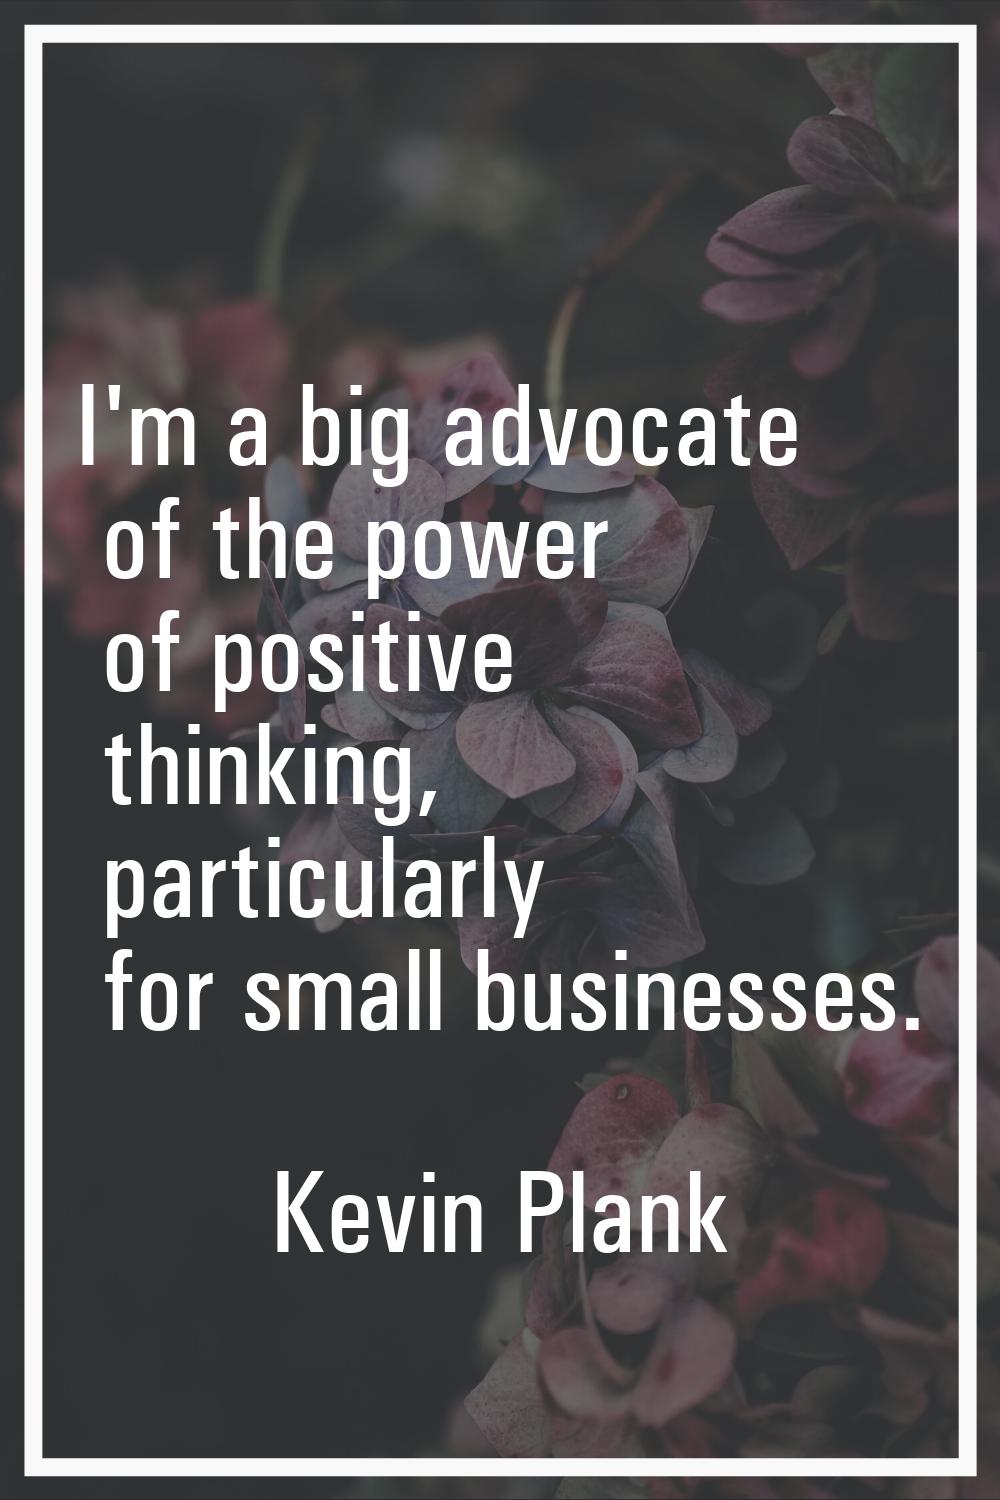 I'm a big advocate of the power of positive thinking, particularly for small businesses.